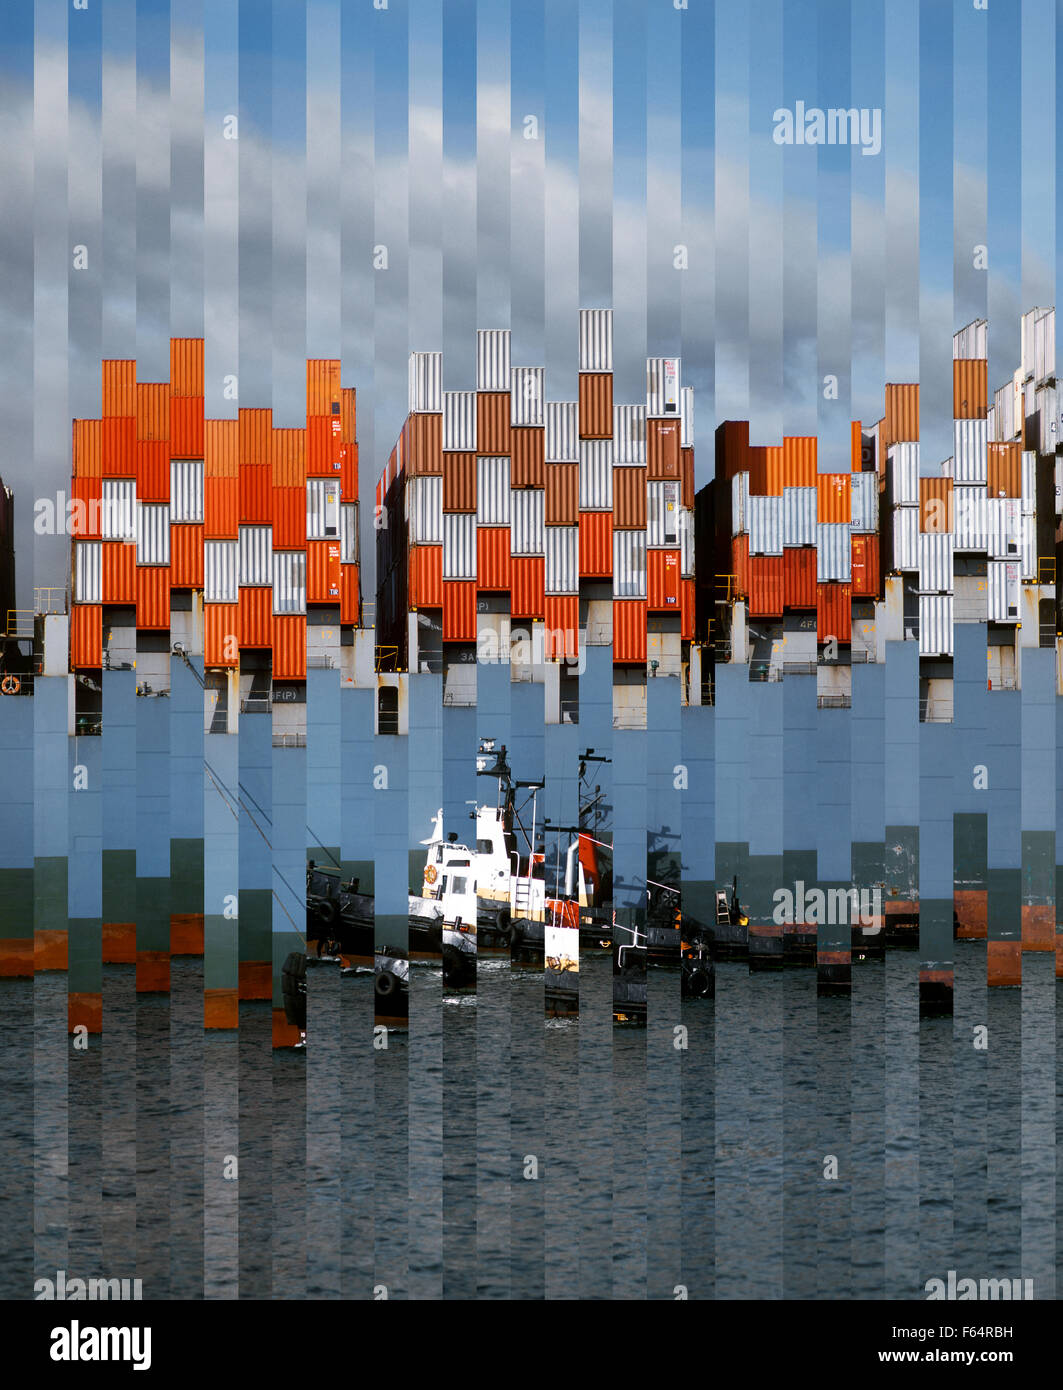 Tugboat guiding cargo ship Viewed Through Distorted Glass Stock Photo